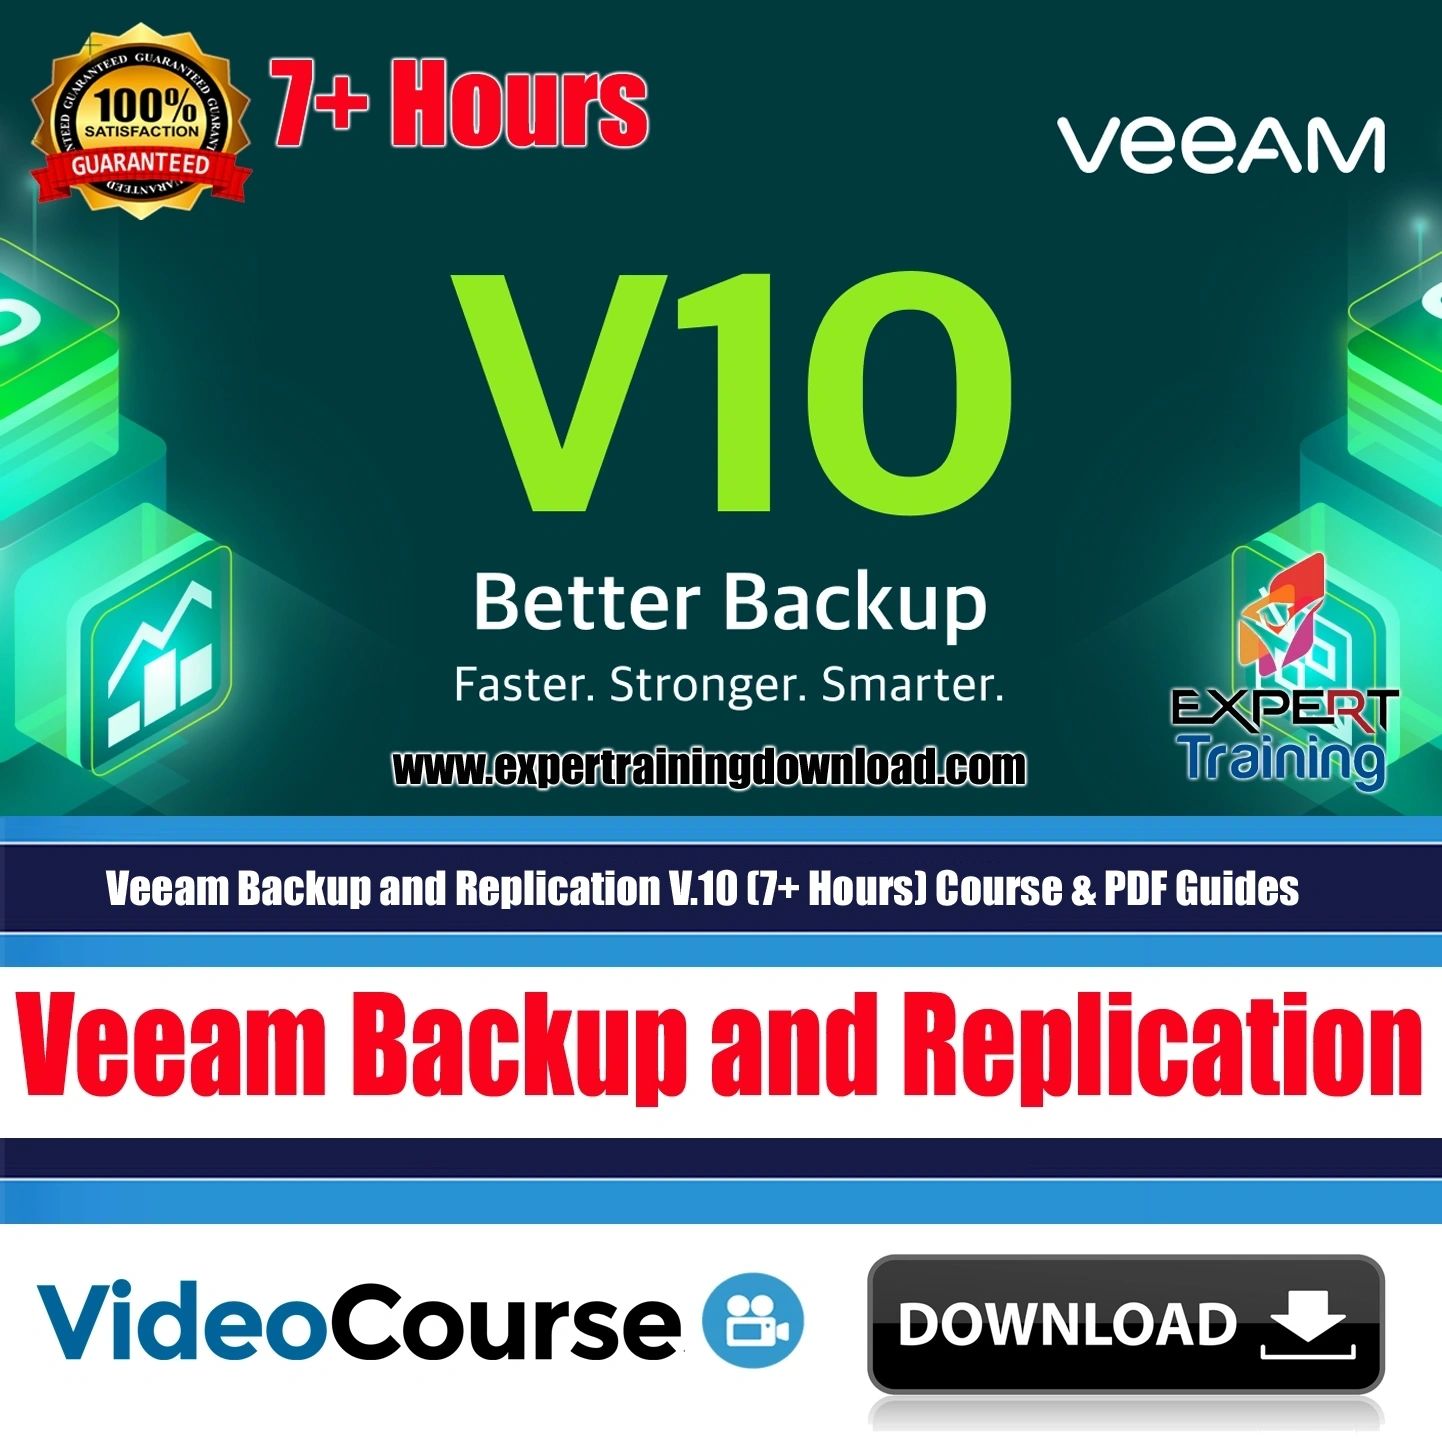 Veeam Backup and Replication V.10 (7+ Hours) Course & PDF Guides